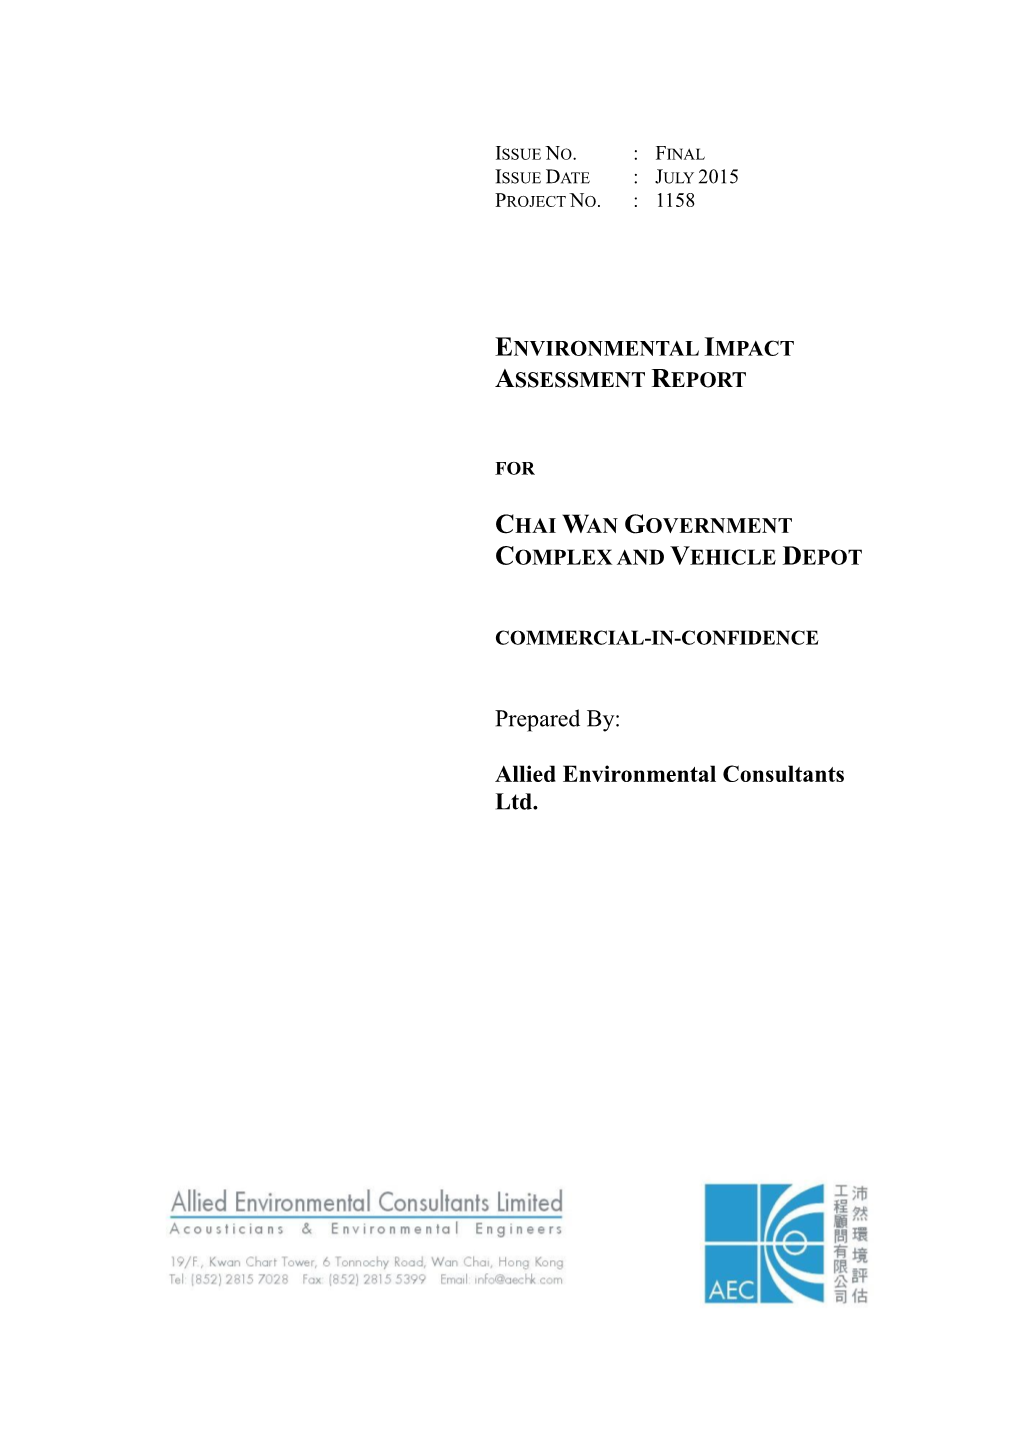 EIA Report Was Prepared in Accordance with the Abovementioned EIA Study Brief (No